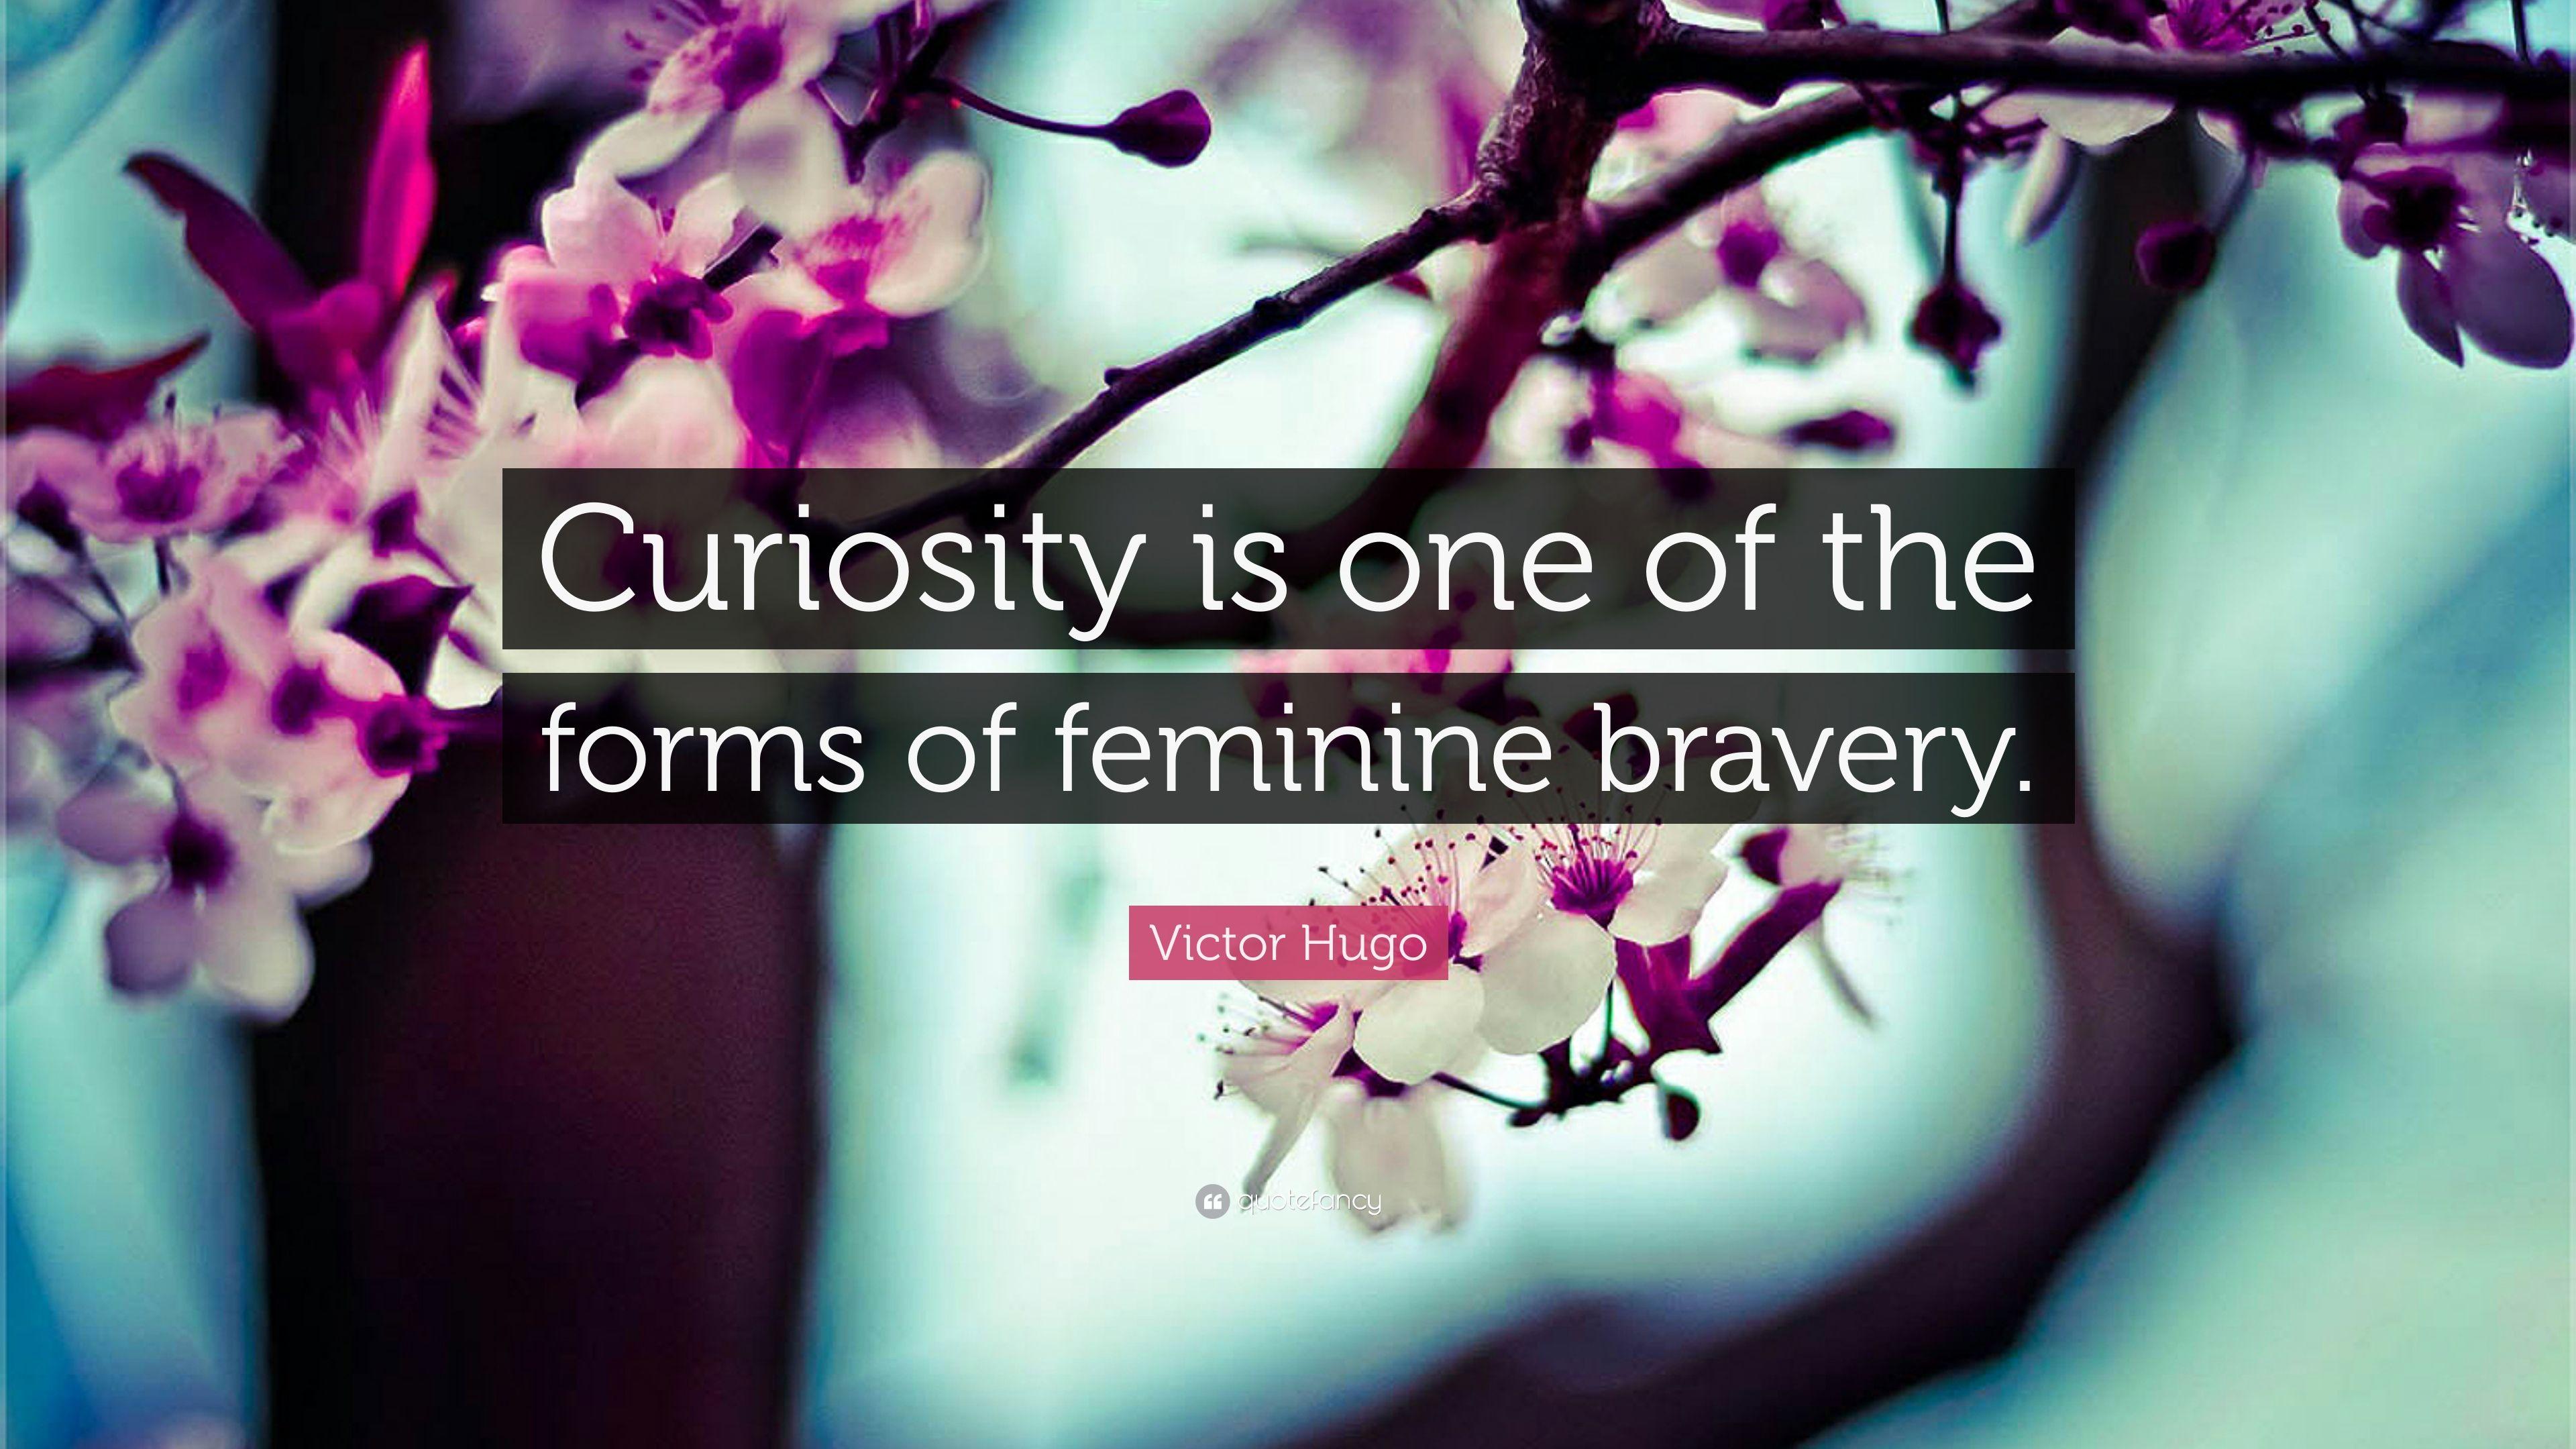 Victor Hugo Quote: “Curiosity is one of the forms of feminine